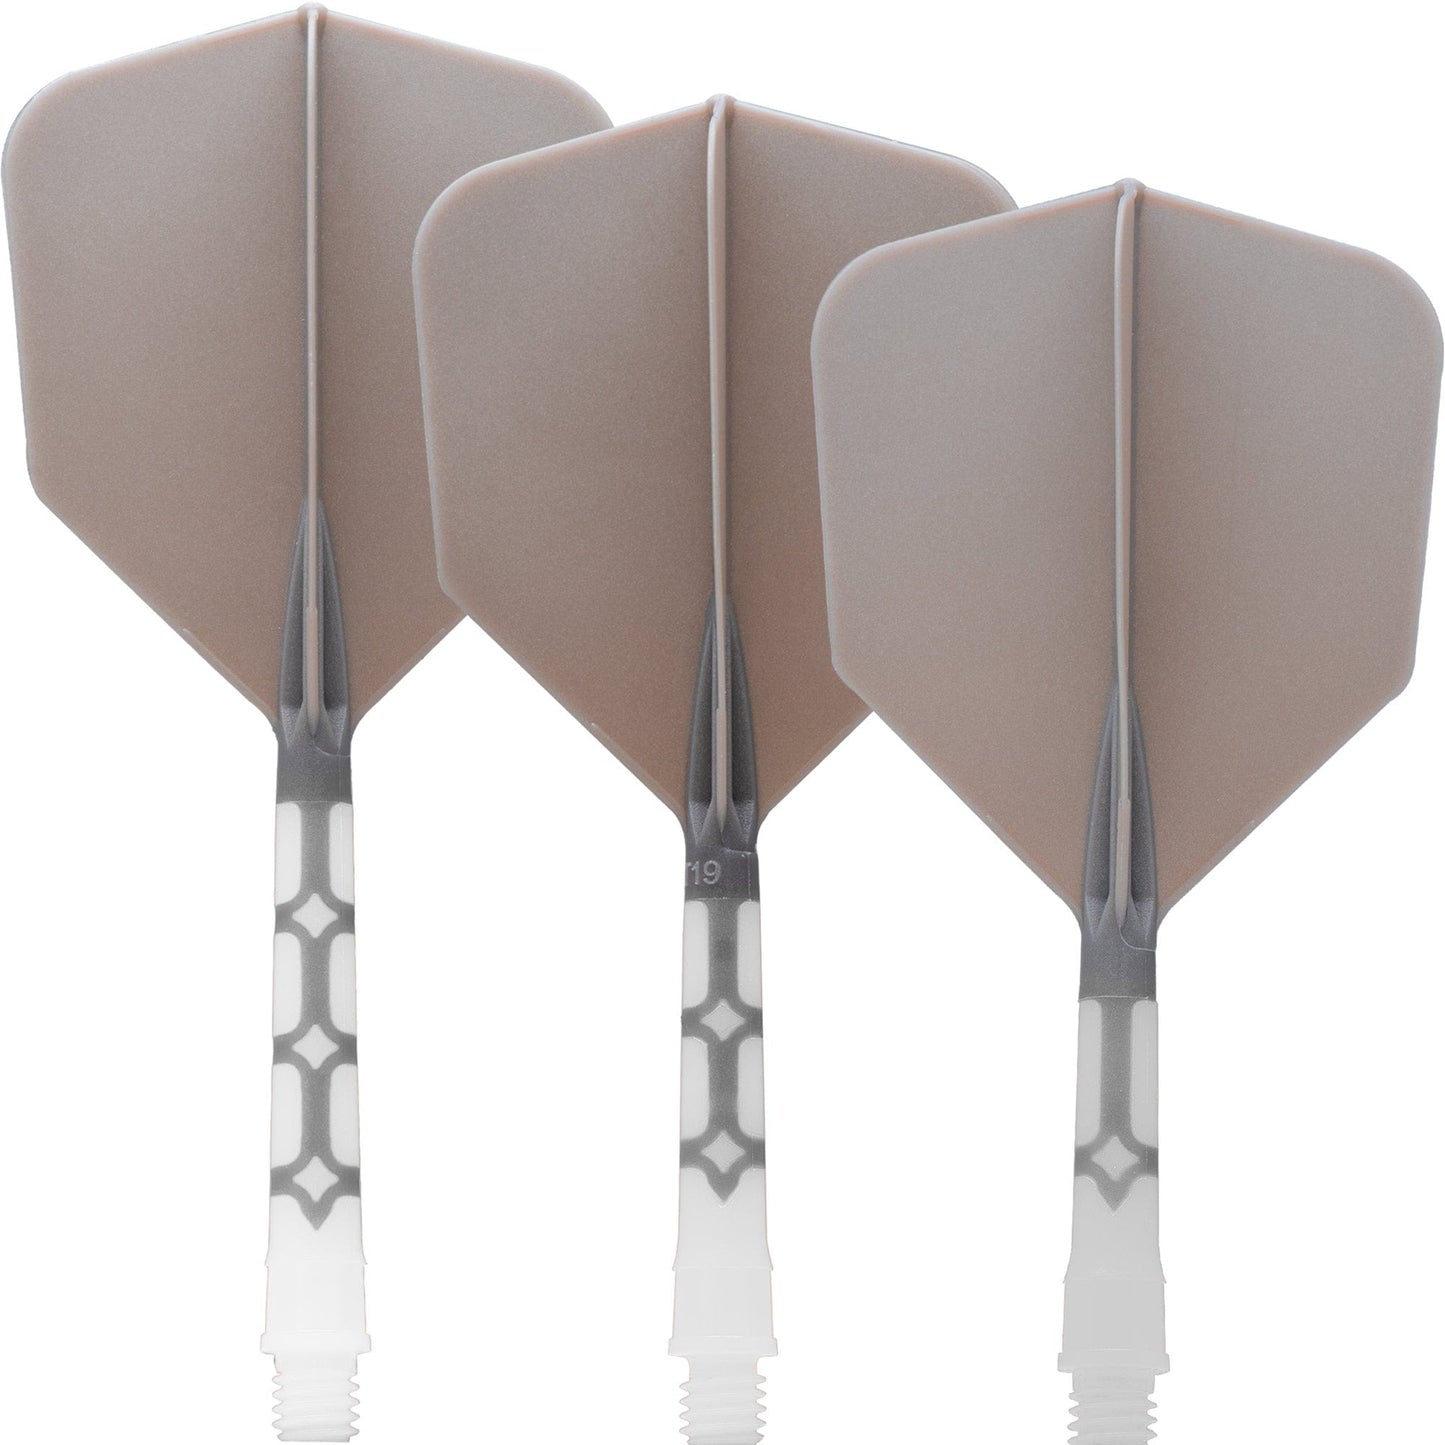 Cuesoul Rost T19 Integrated Dart Shaft and Flights - Big Wing - White with Grey Flight